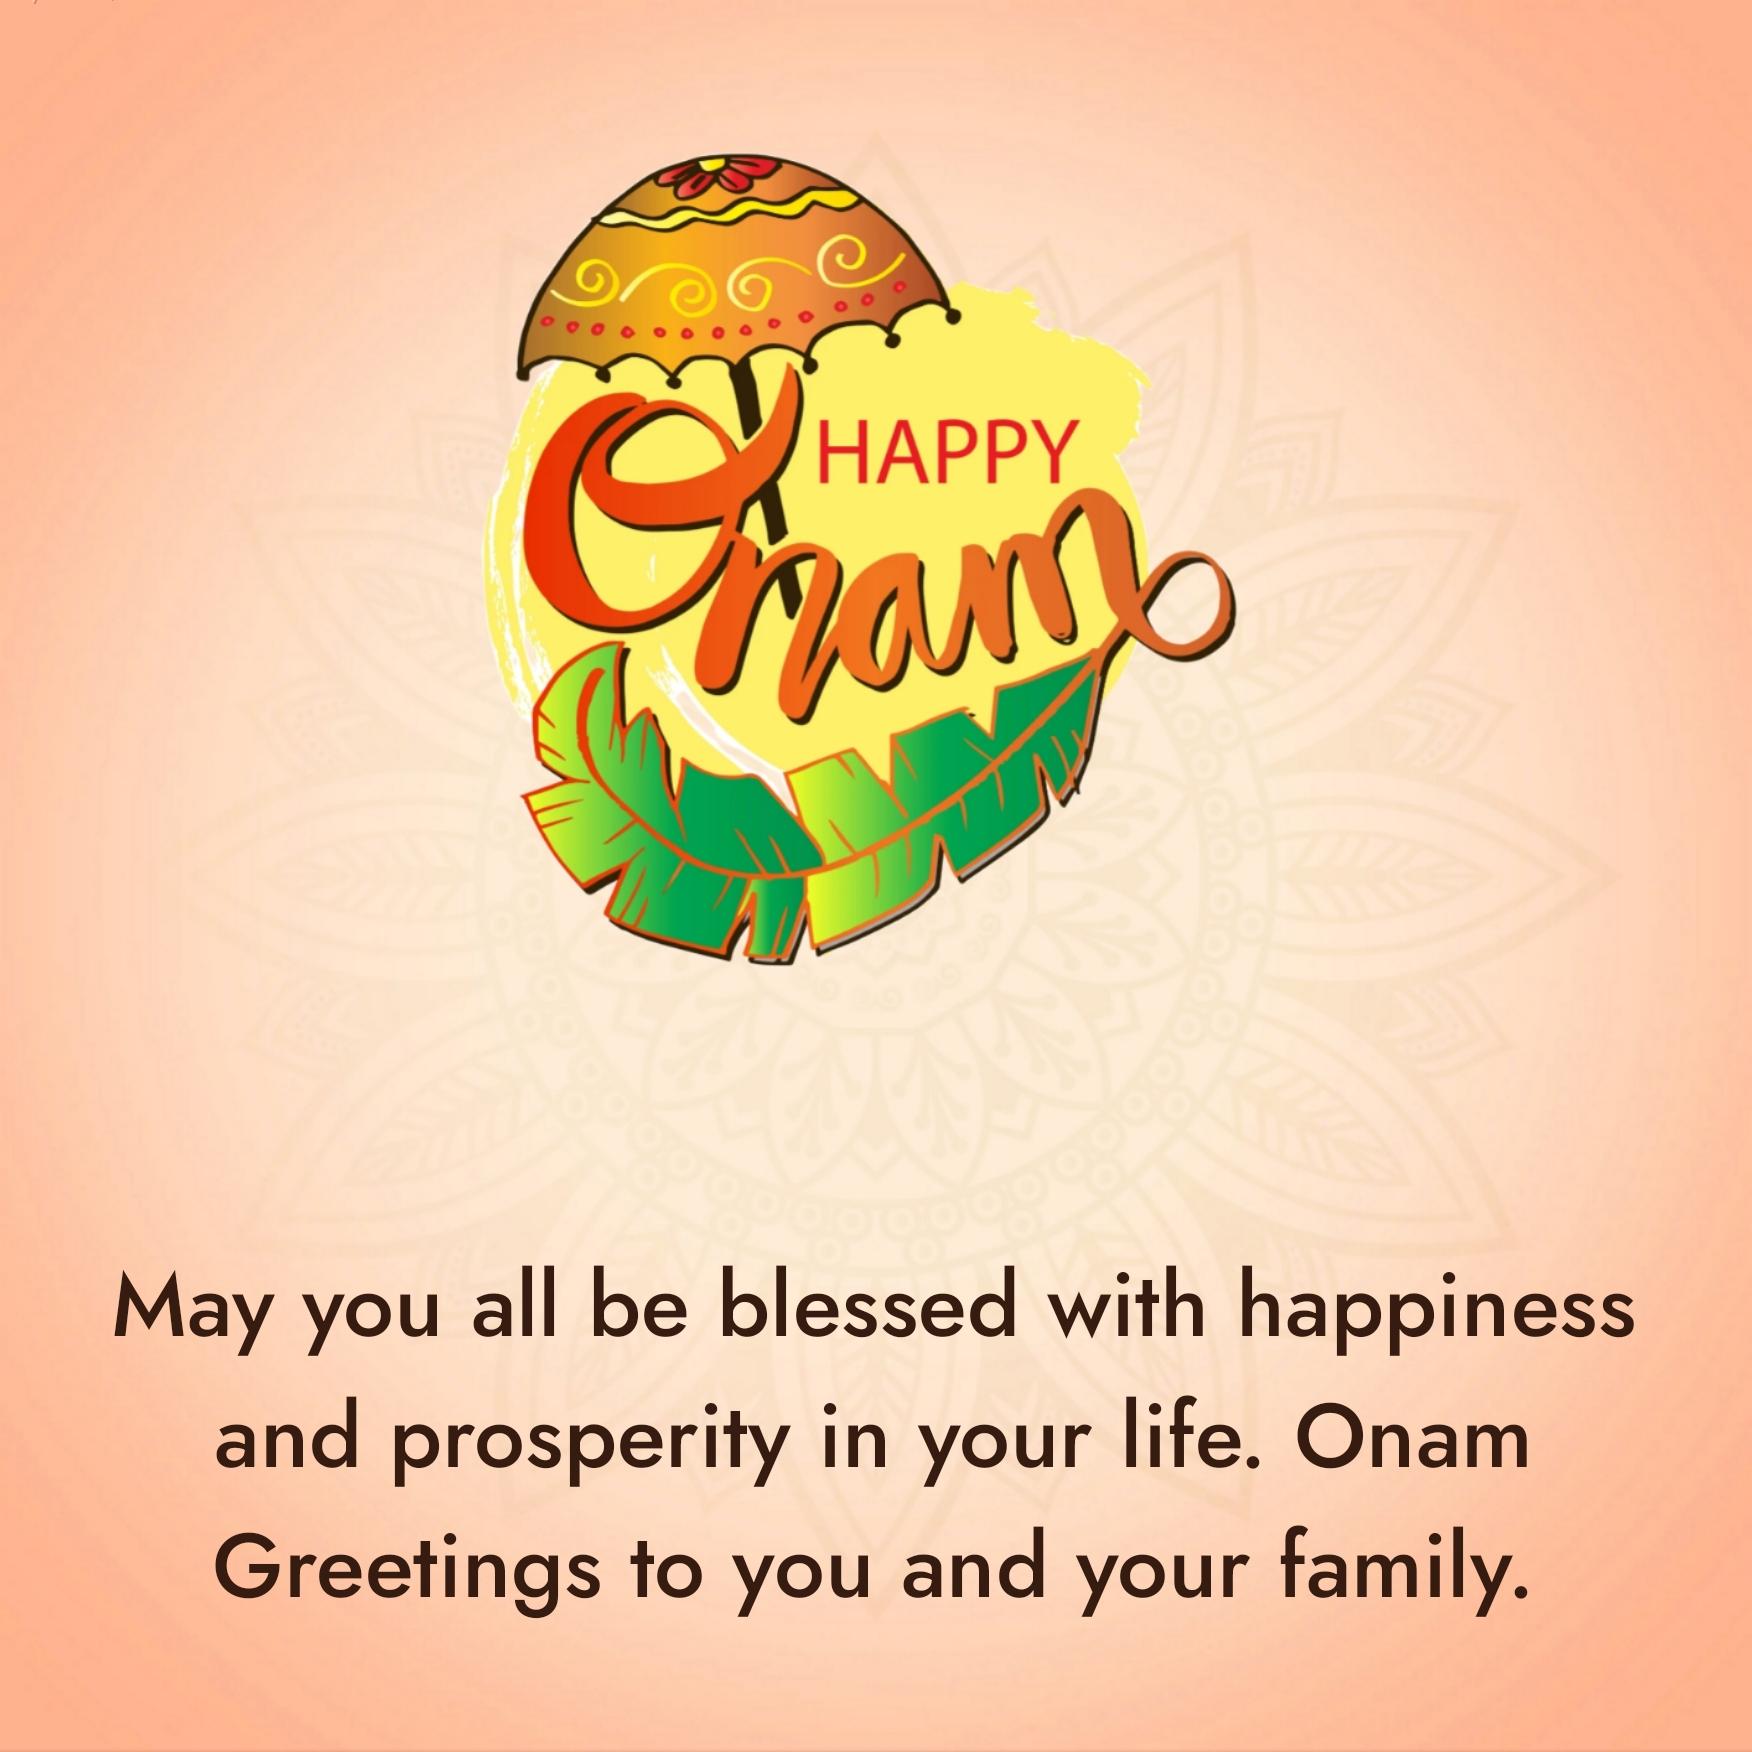 May you all be blessed with happiness and prosperity